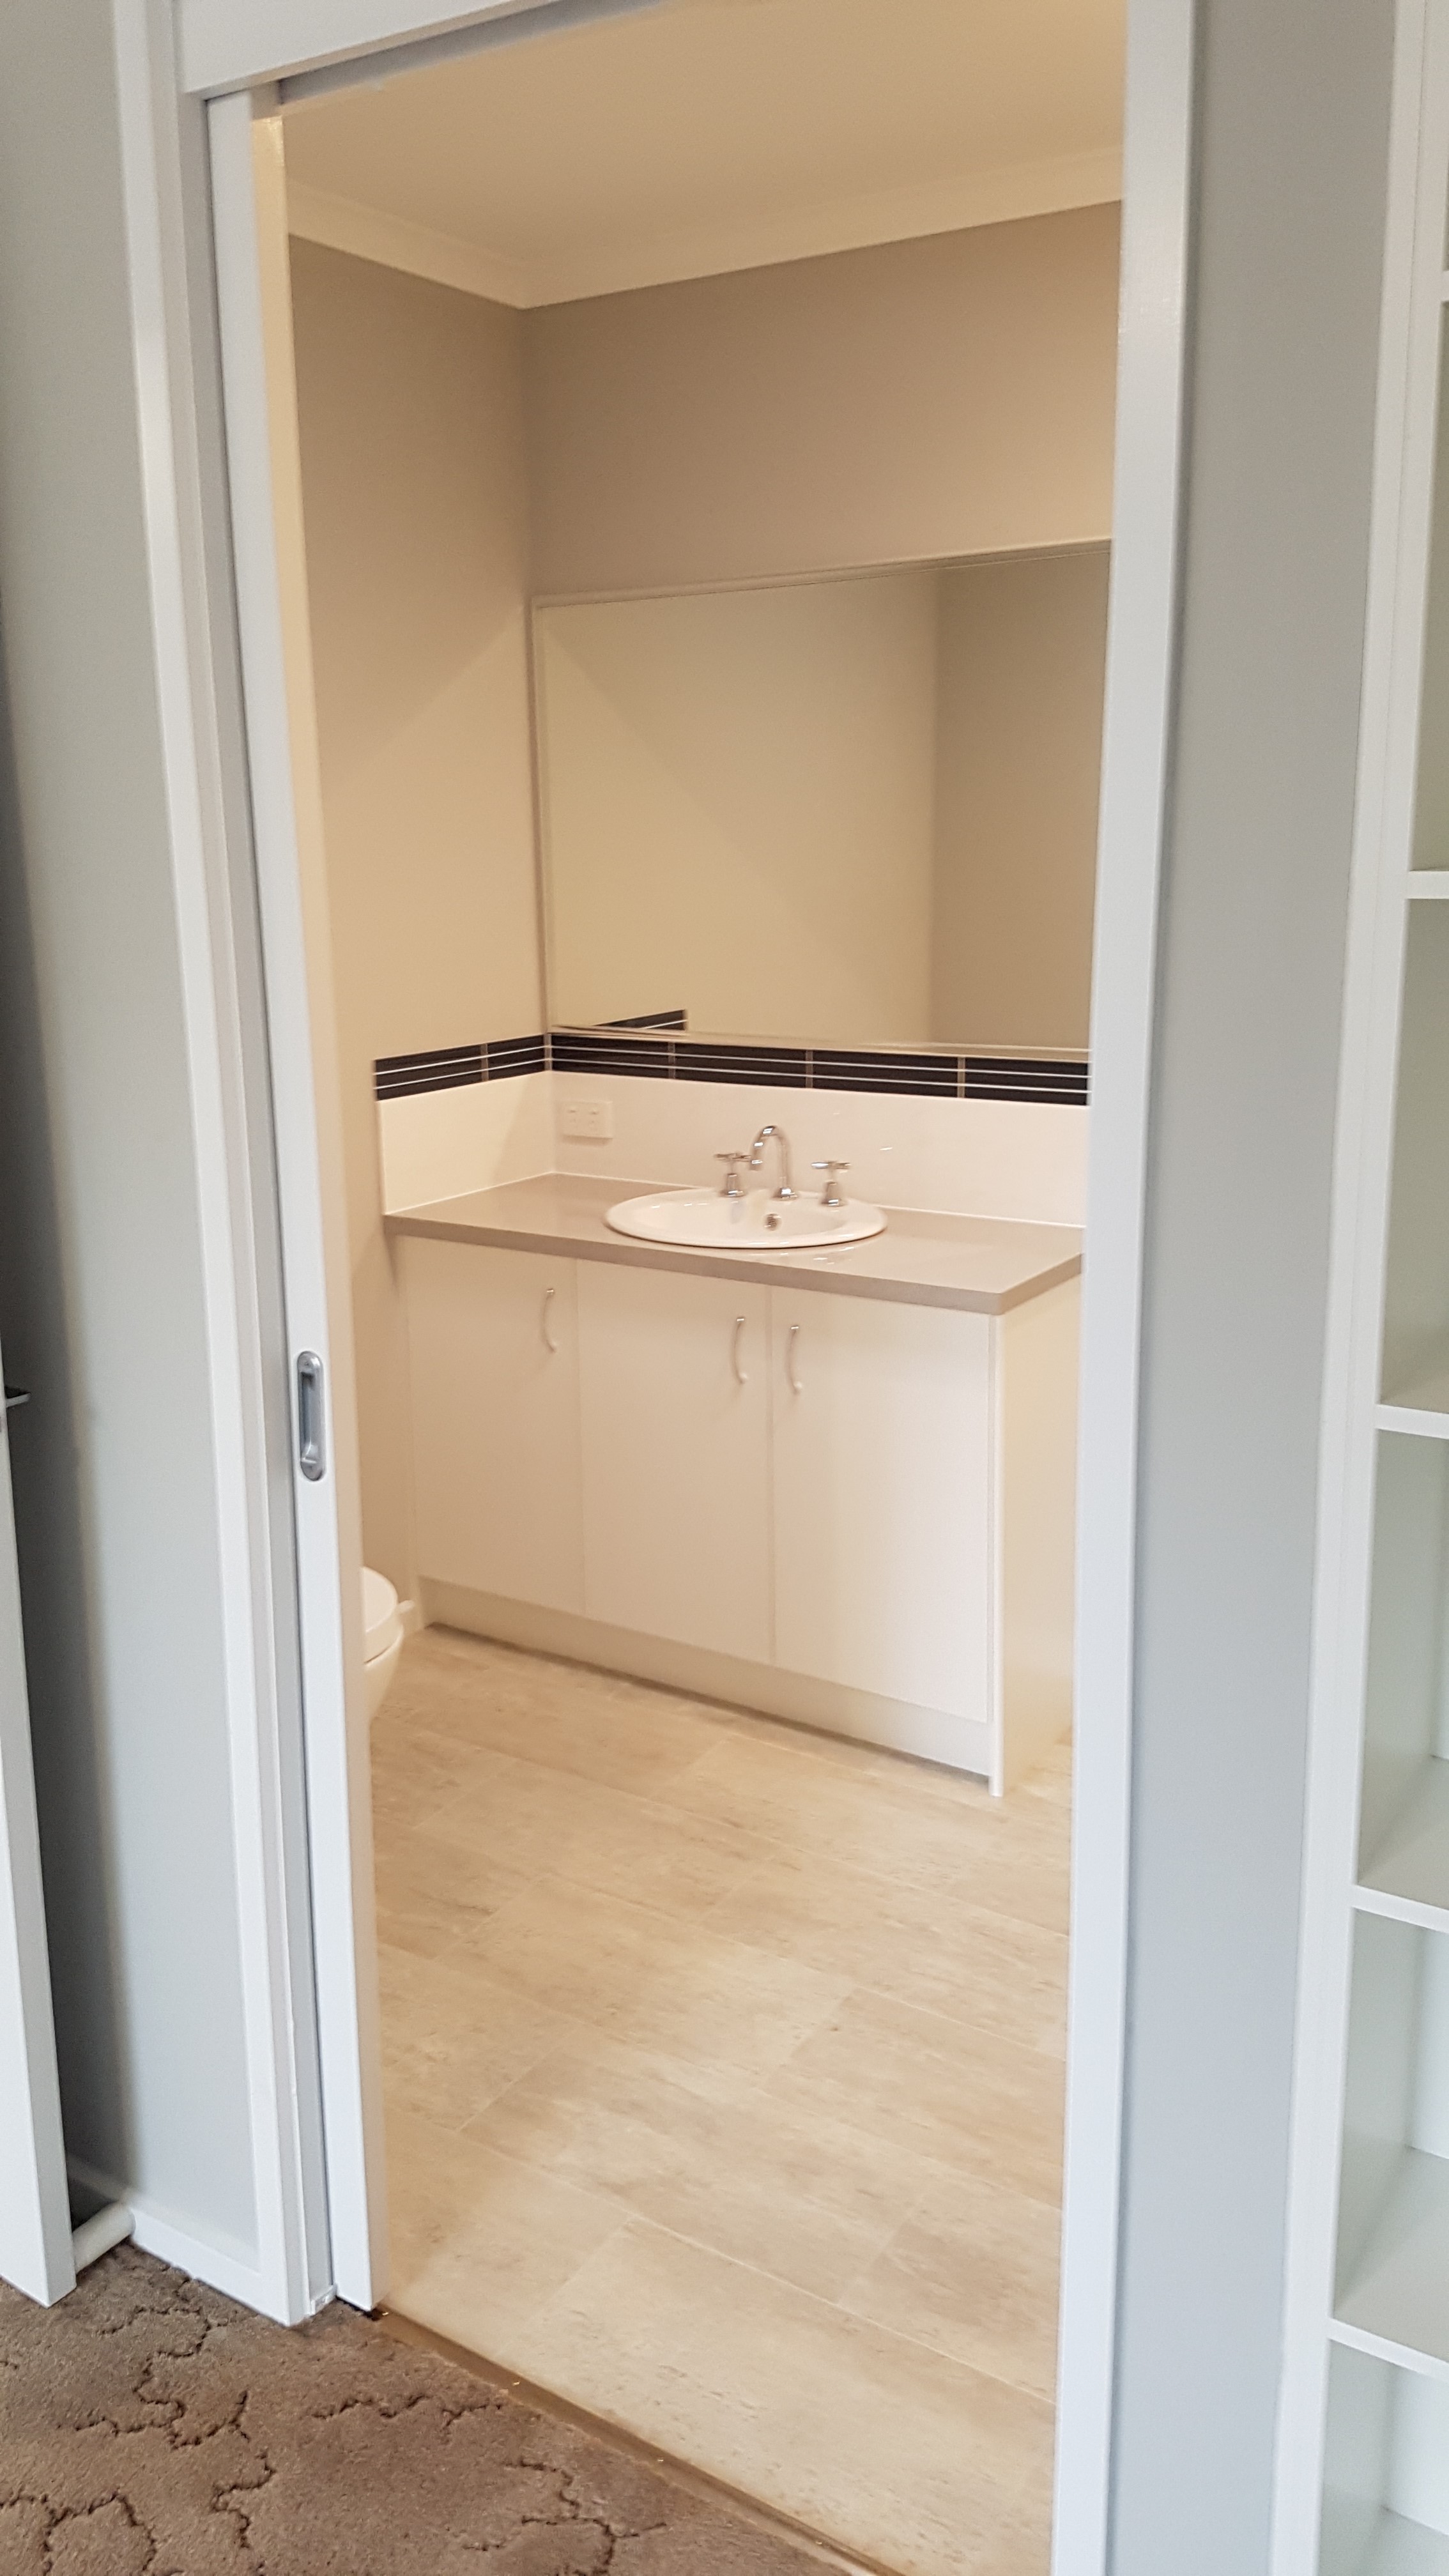 Whittlesea Granny Flat – Bathrooms and Kitchens Galore